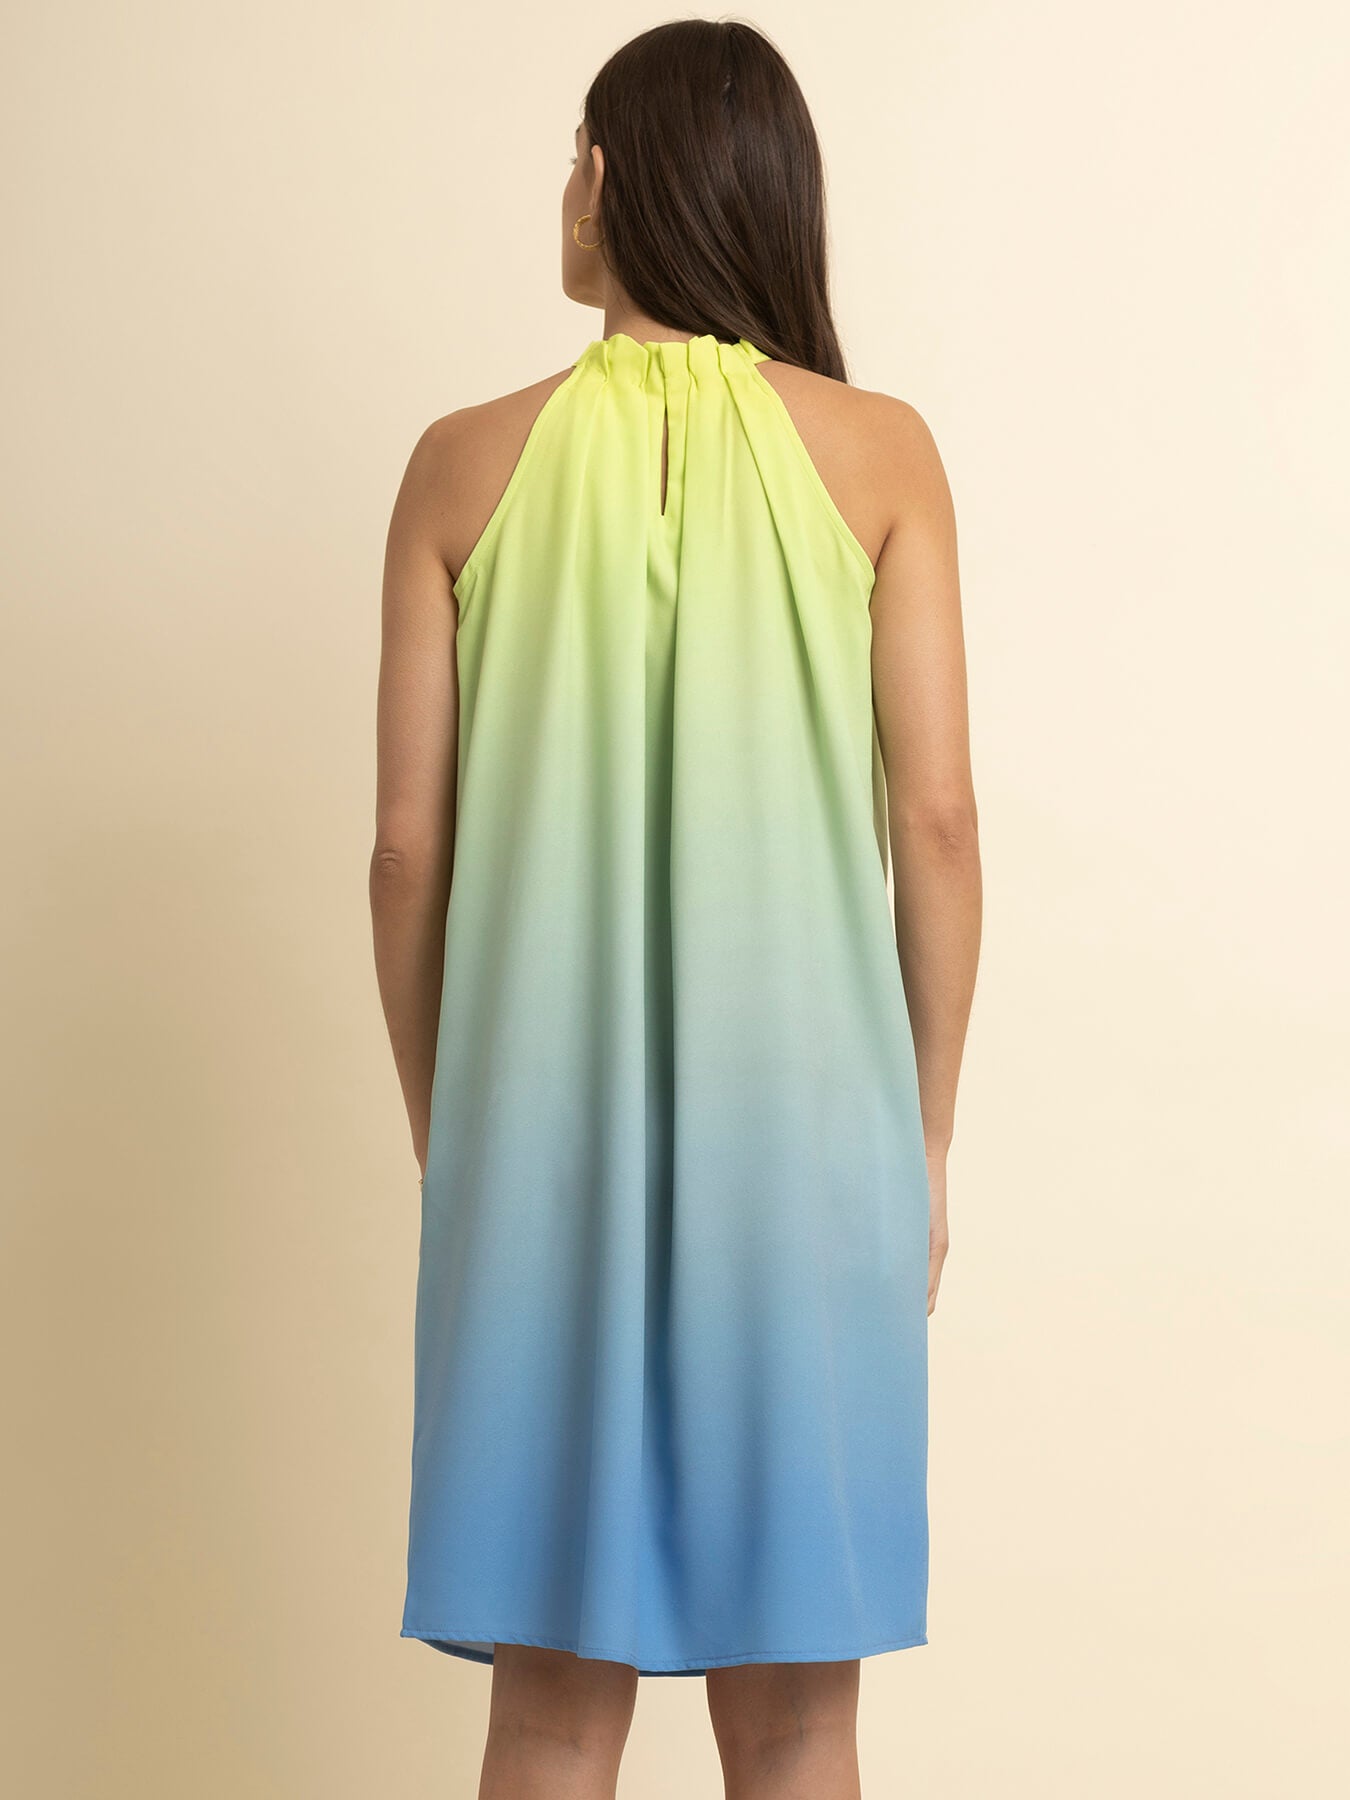 Box Pleat Ombre Dress - Green and Blue